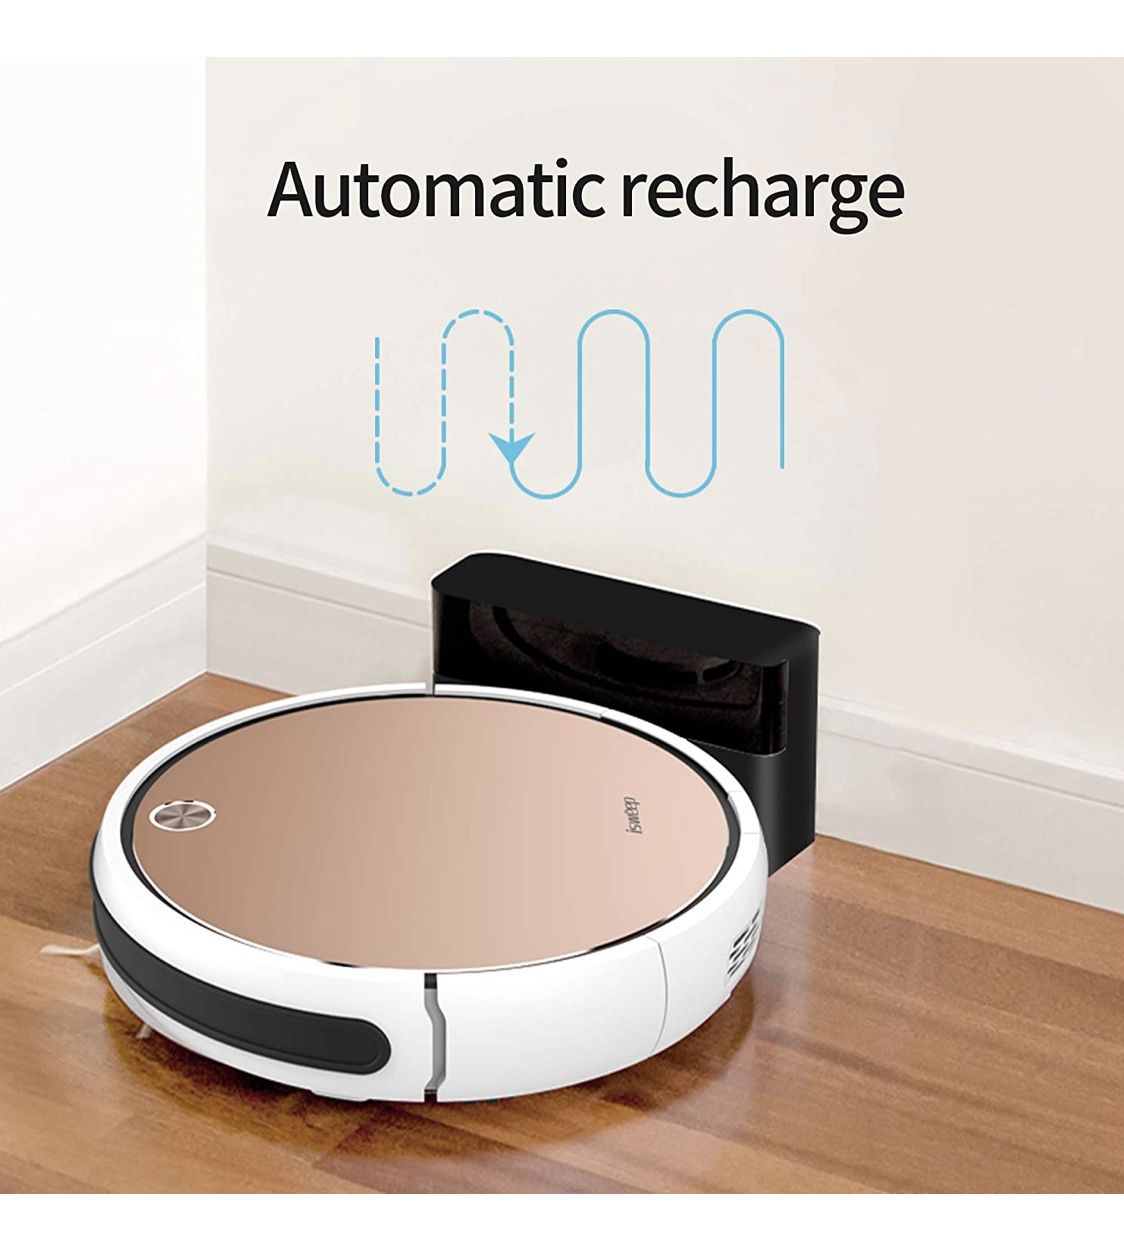 2-in-1 Robot Vacuum And Mop, Wi-Fi App control, 1800Pa Suction,500ml Dustbin, Automatic Self-Charging Robotic Vacuums Cleaner, Ideal for Pet Hair, Har